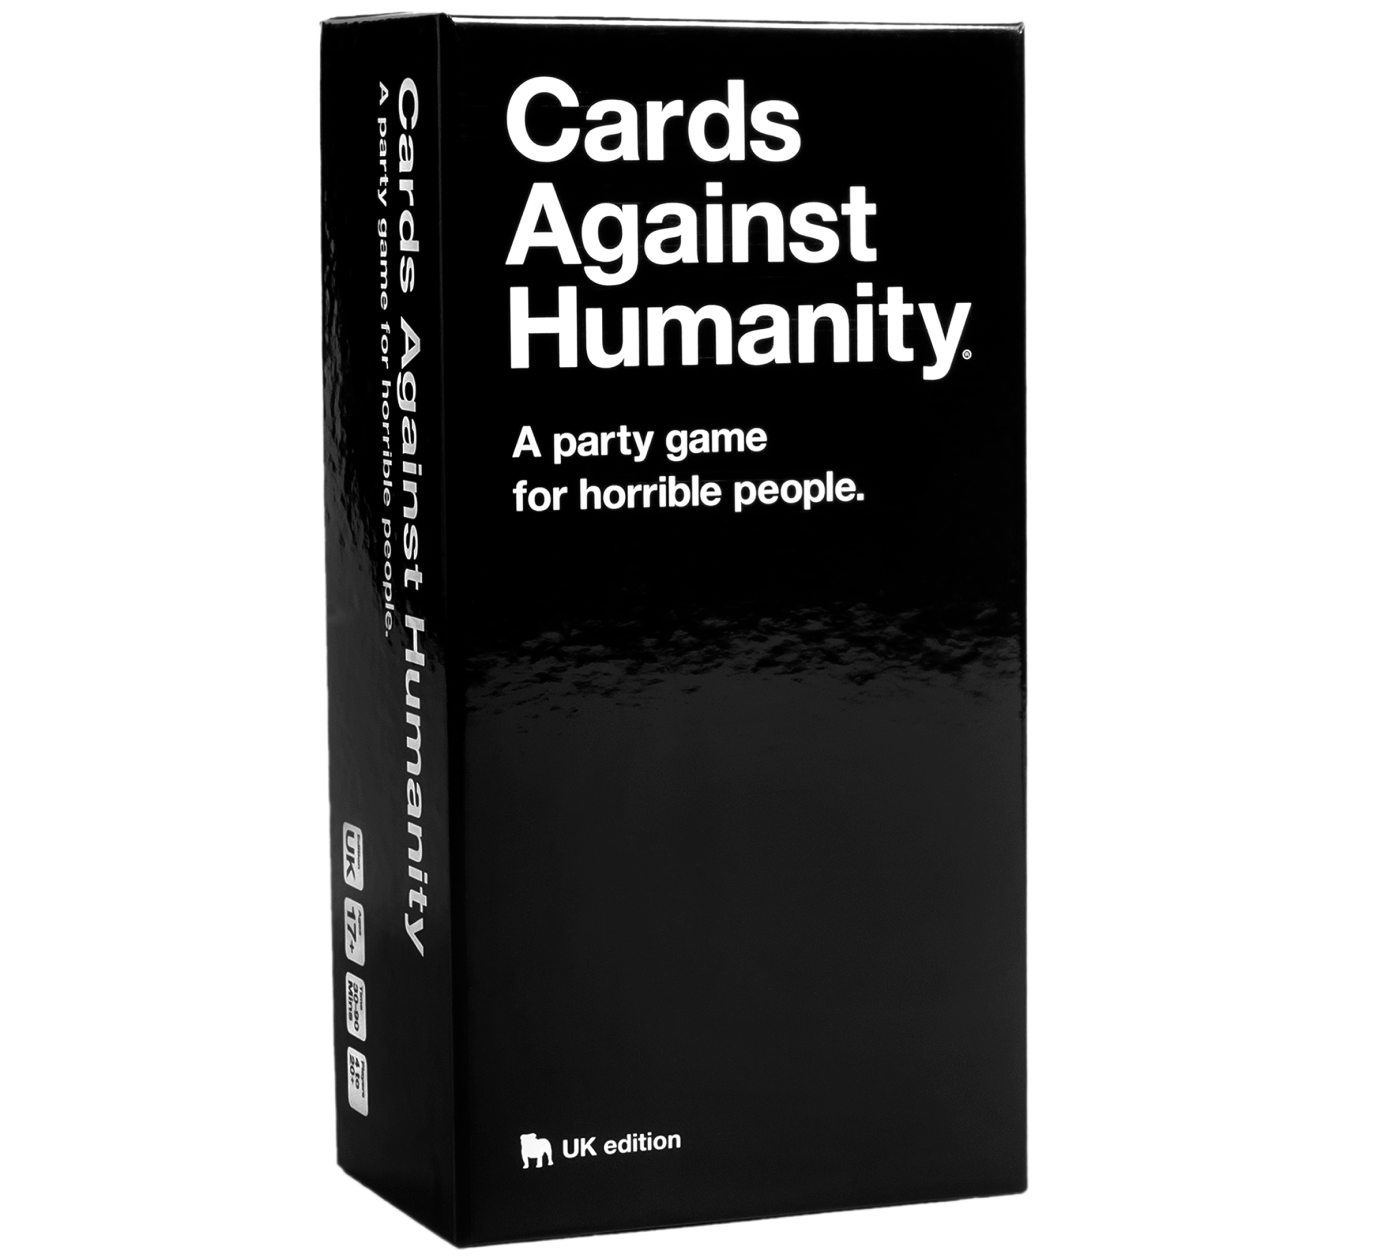 Cards Against Humanity UK Expansion Bundle Geek Science 90s FREE 1st Class Ship 